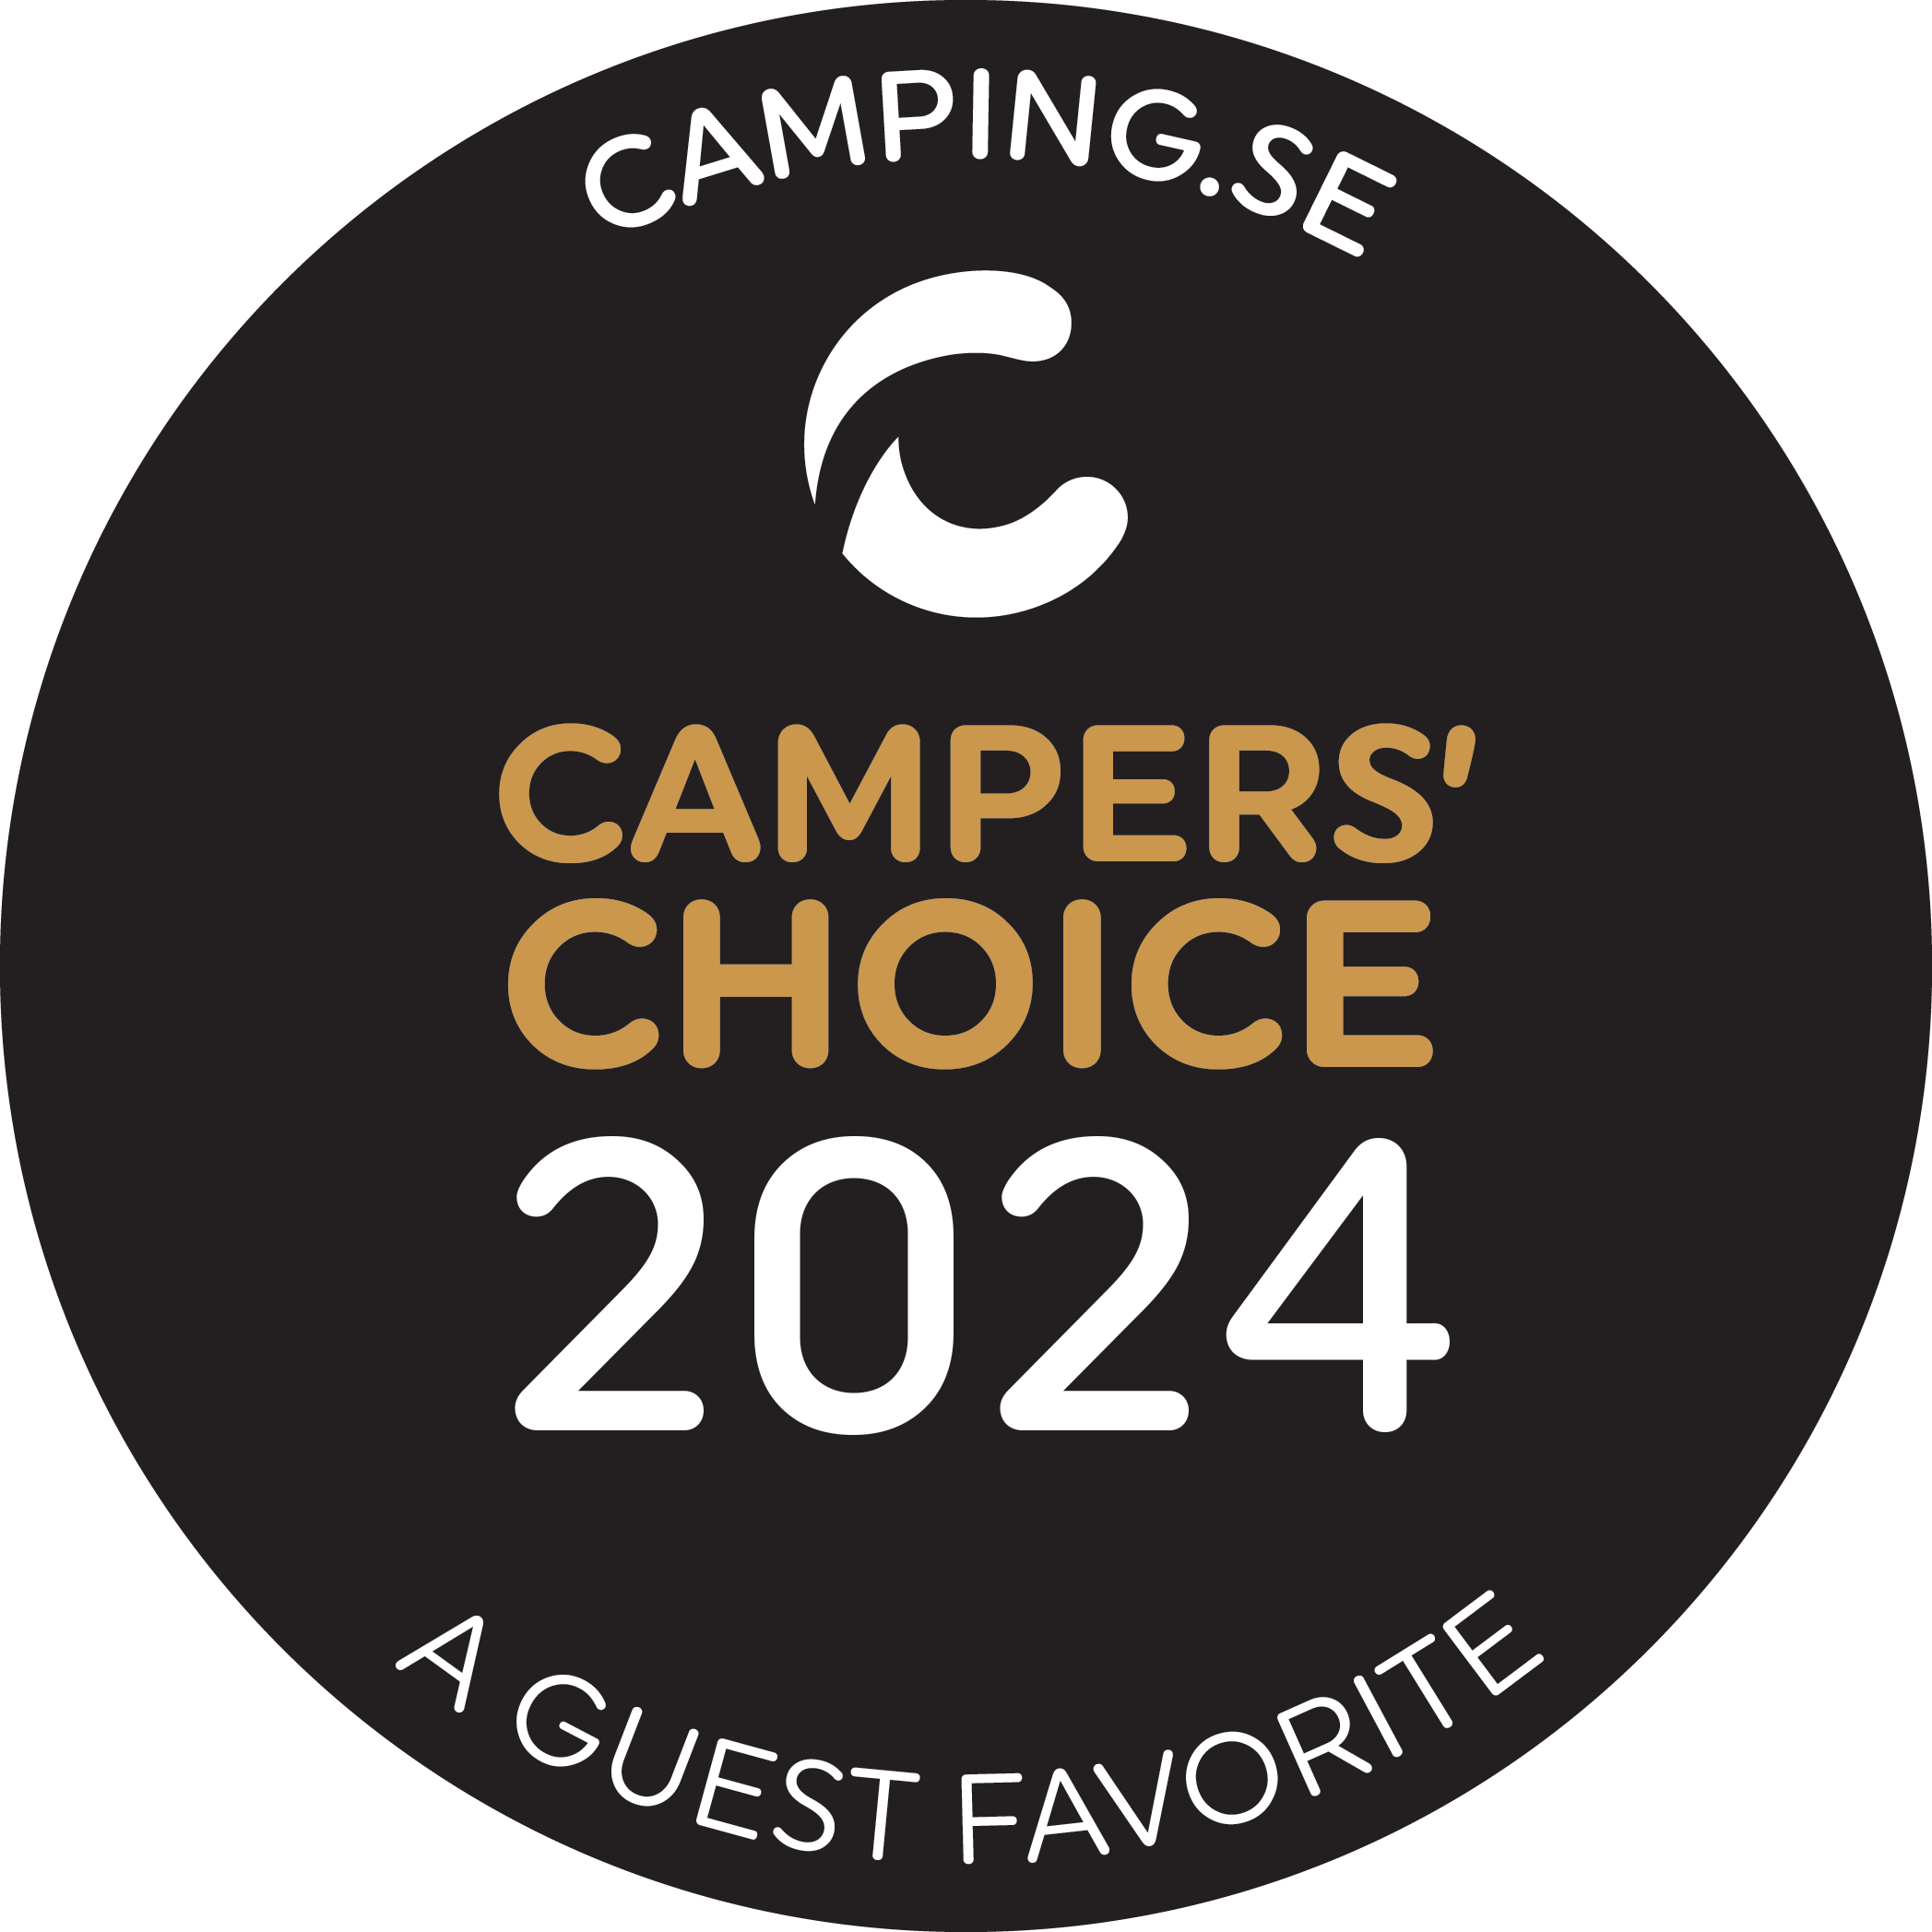 Camping.se Campers' Choice 2024